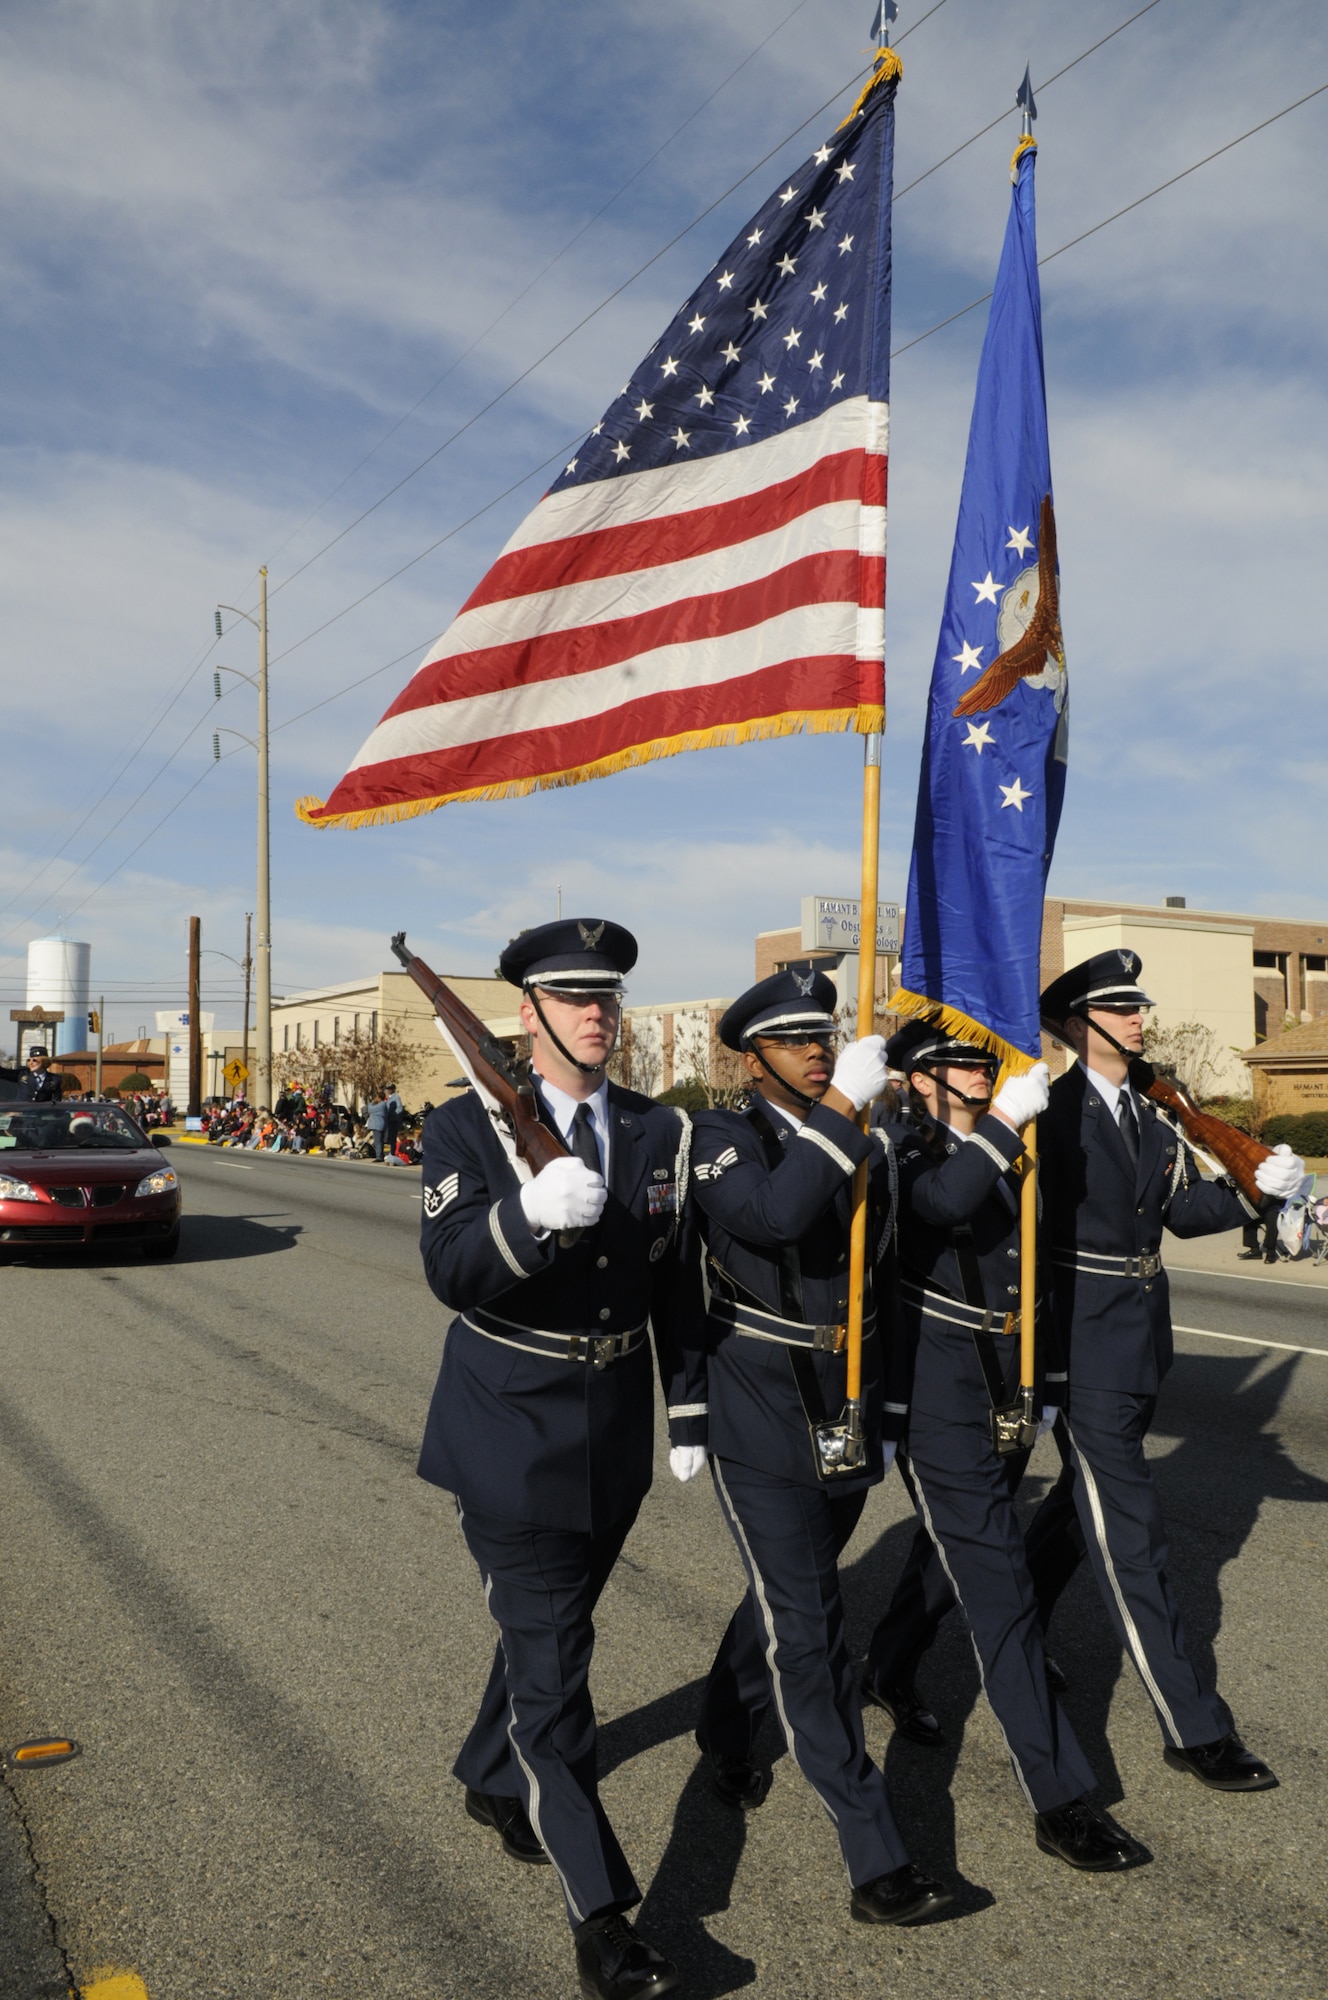 Robins Honor Guard leads the Warner Robins Christmas Parade down Watson Blvd.
They are  SSgt. MatthewTubbs, right rifle, SrA Derrick Williams, American flag, A1C Amie Amiotte, Air Force flag, and A1C Jaron Seuis, left rifle. Not pictured-  SrA Nicholas Broome, driver. U. S. Air Force photo by Sue Sapp 